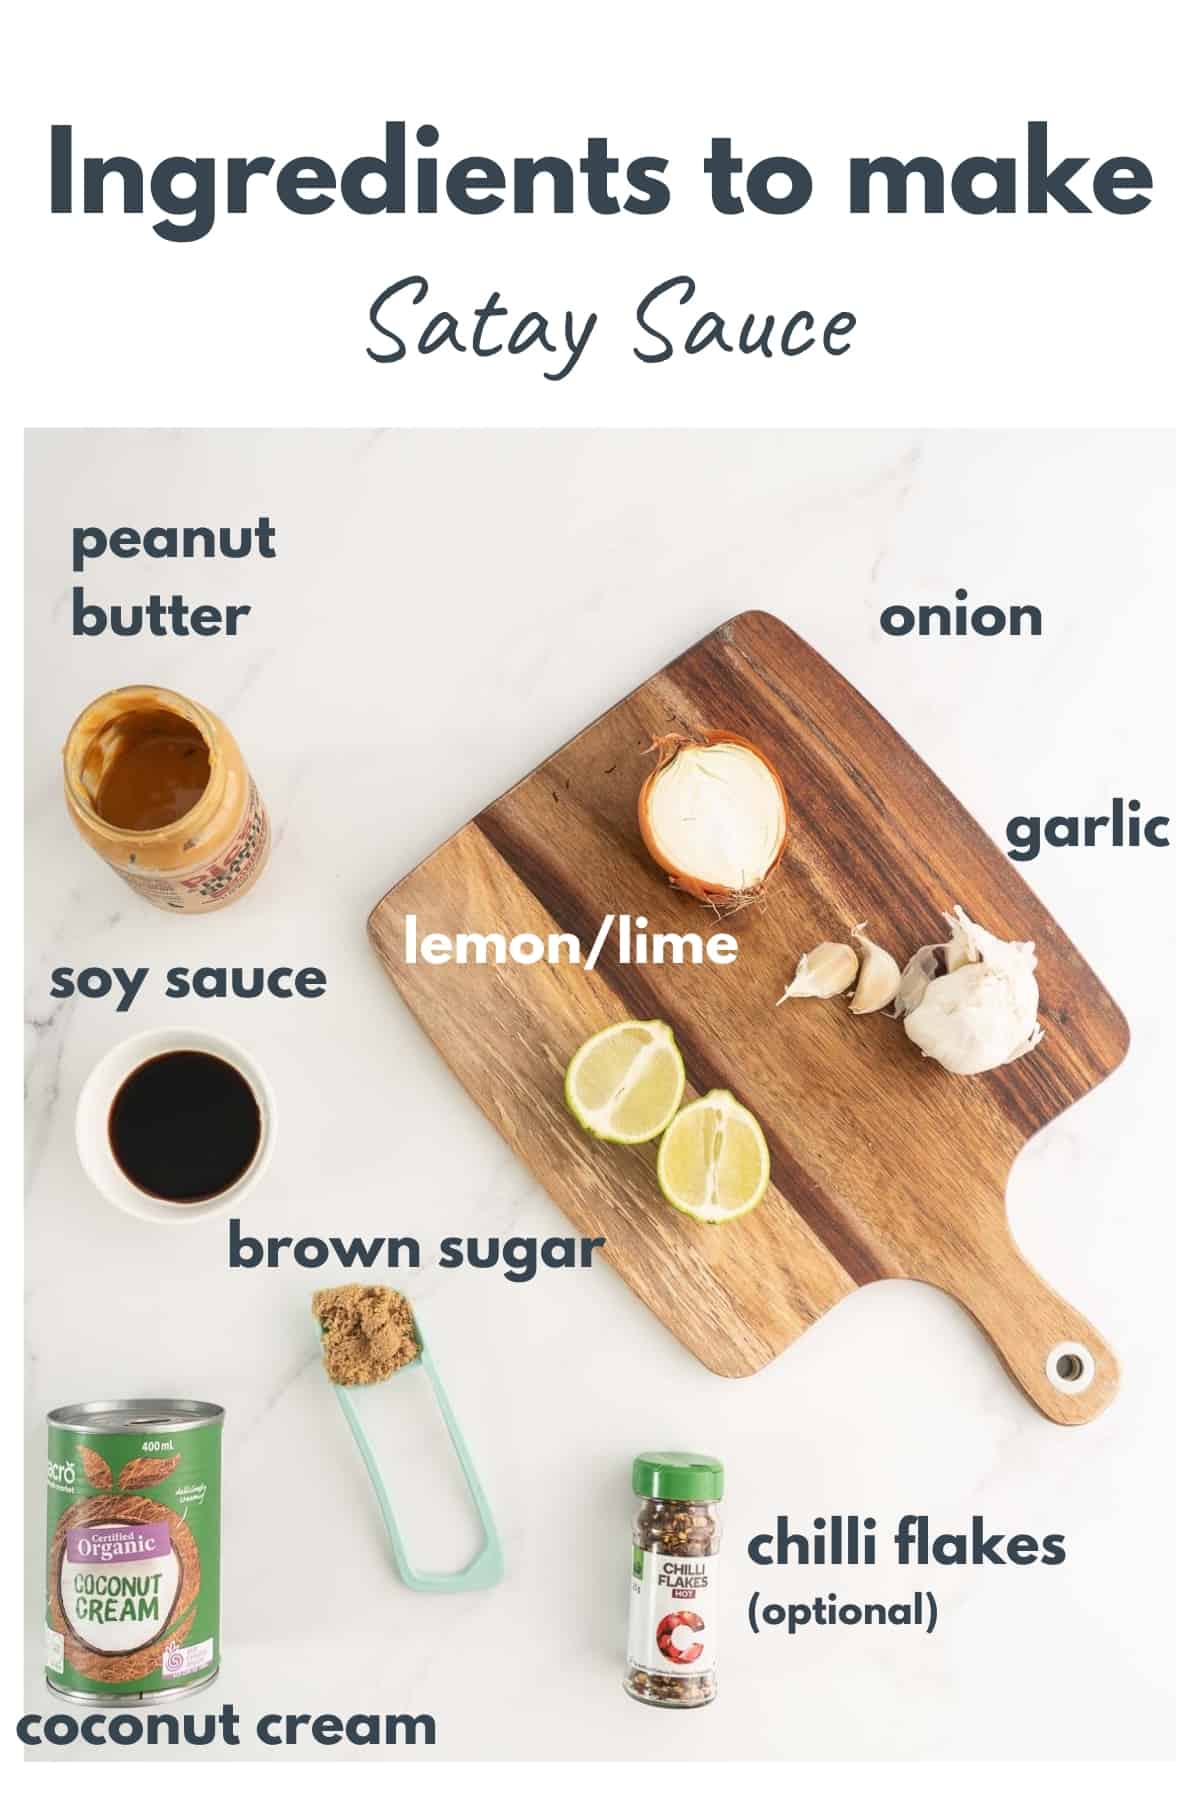 Ingredients to make satay sauce laid out on a bench top with text overlay.